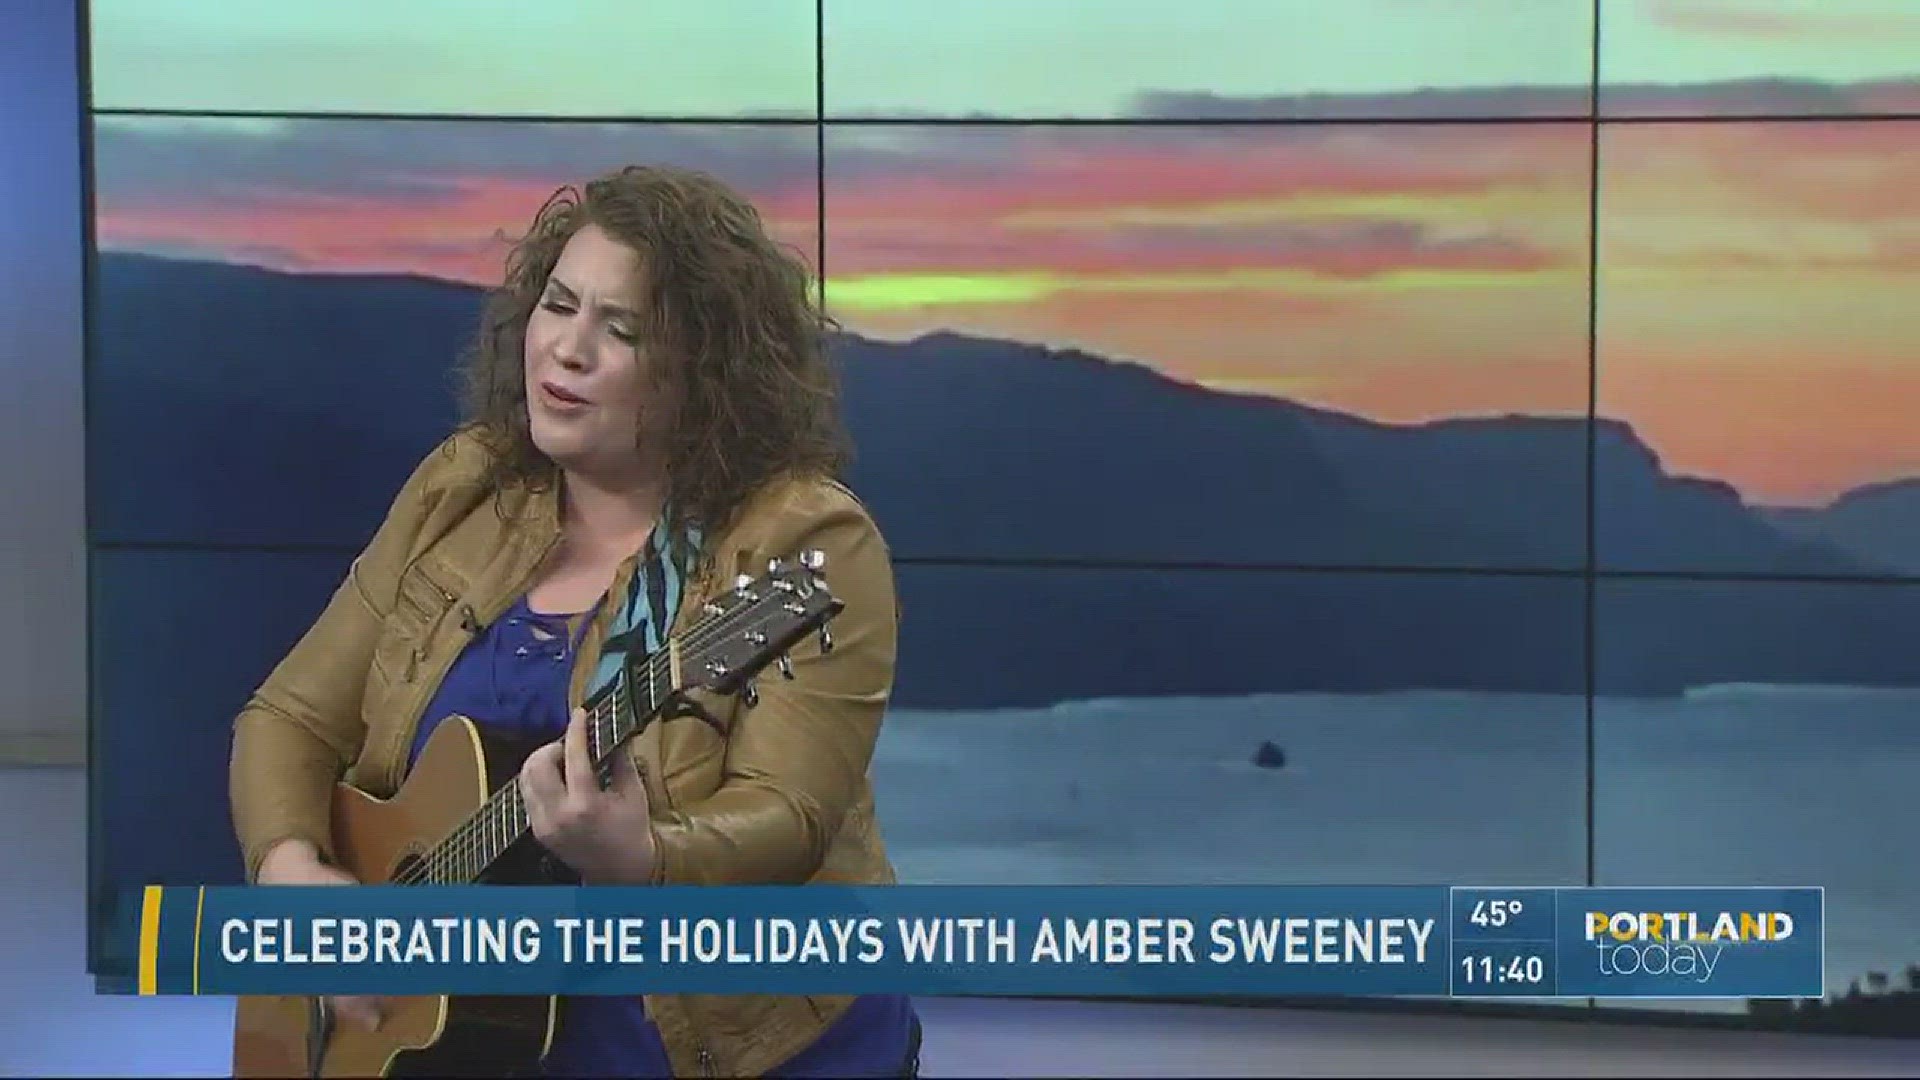 A holiday original by Amber Sweeney